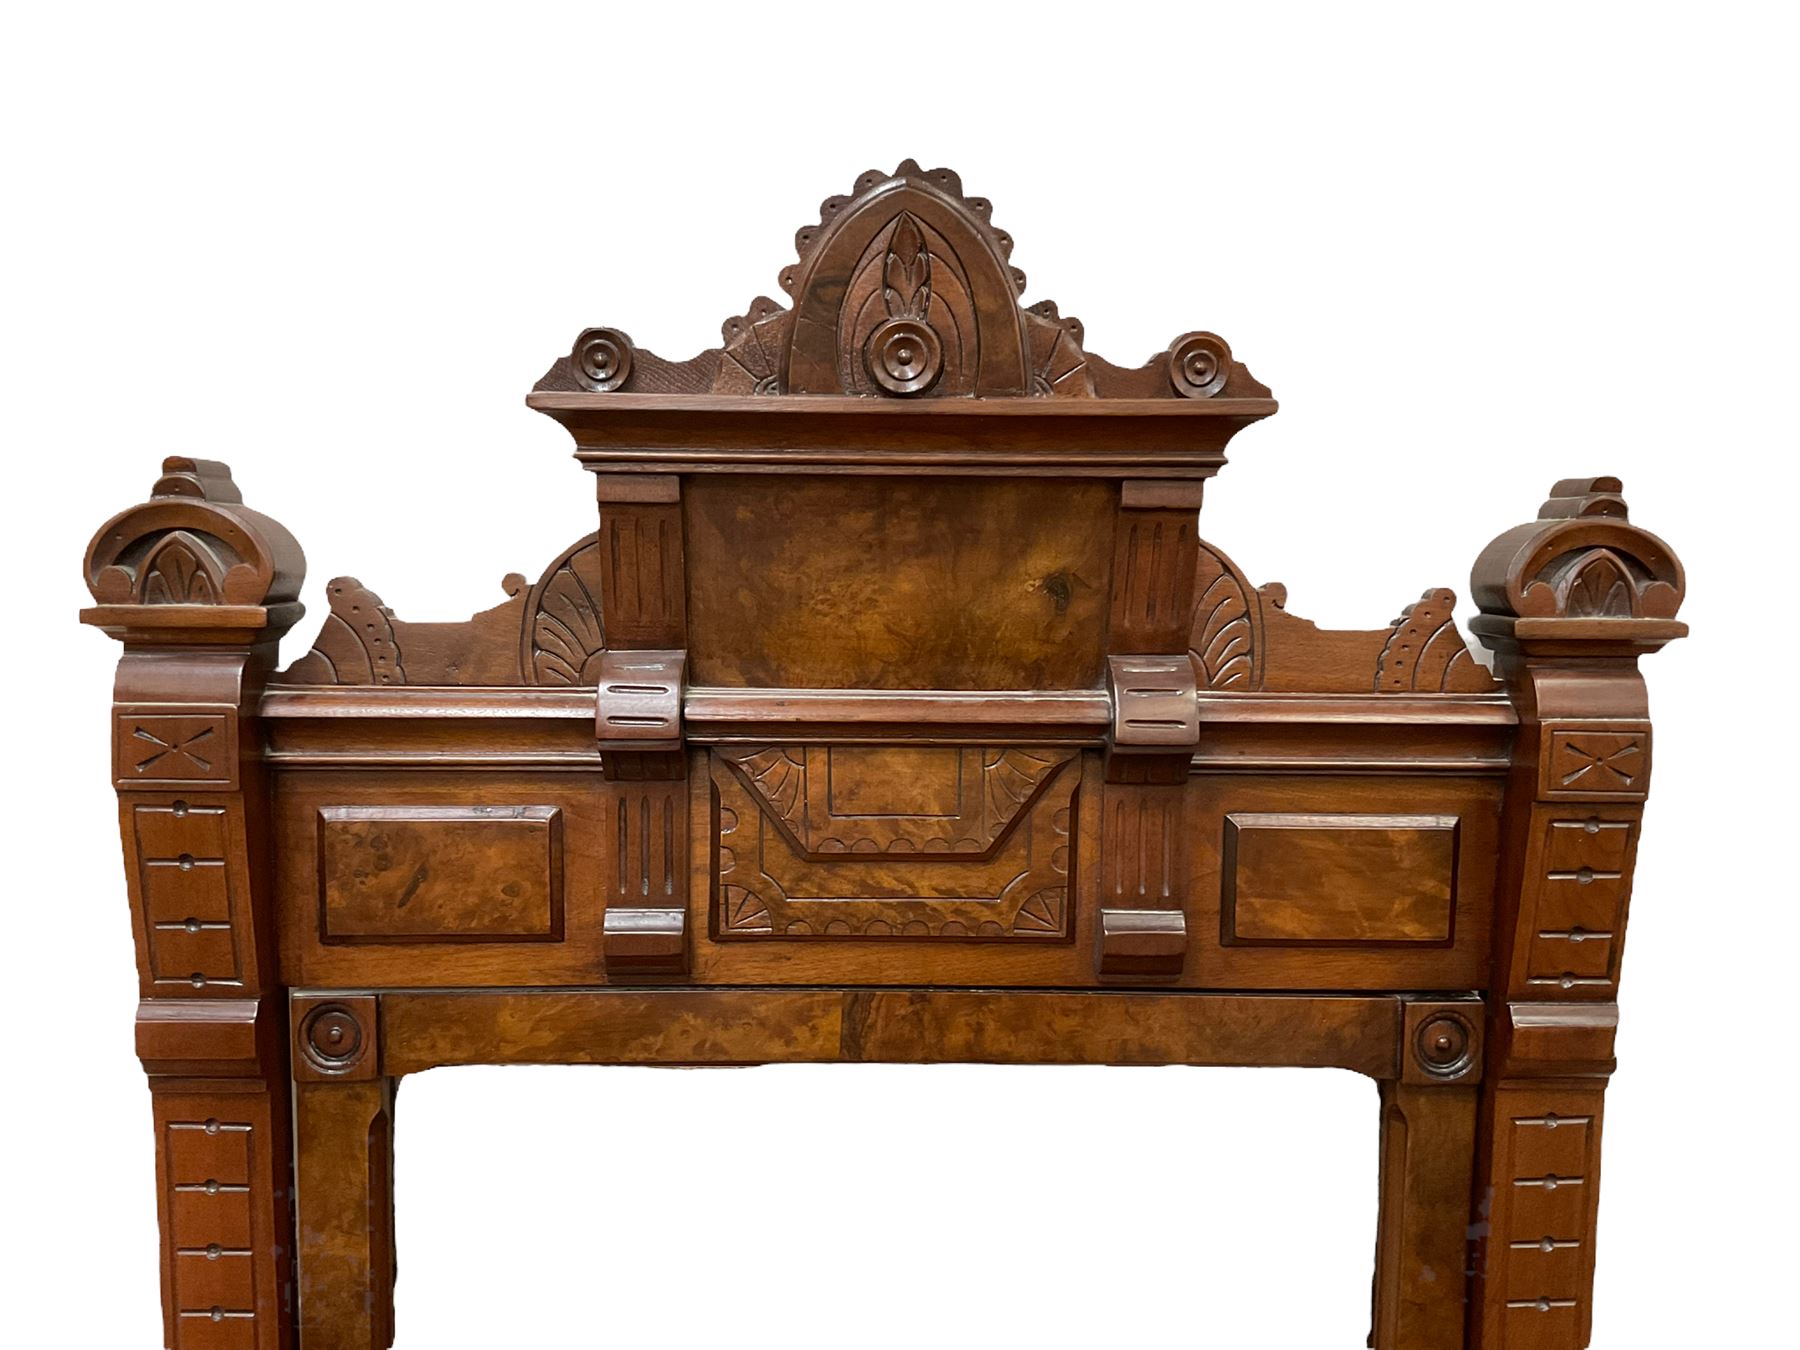 Late 19th/early 20th century walnut dressing chest with mirror back - Image 2 of 4